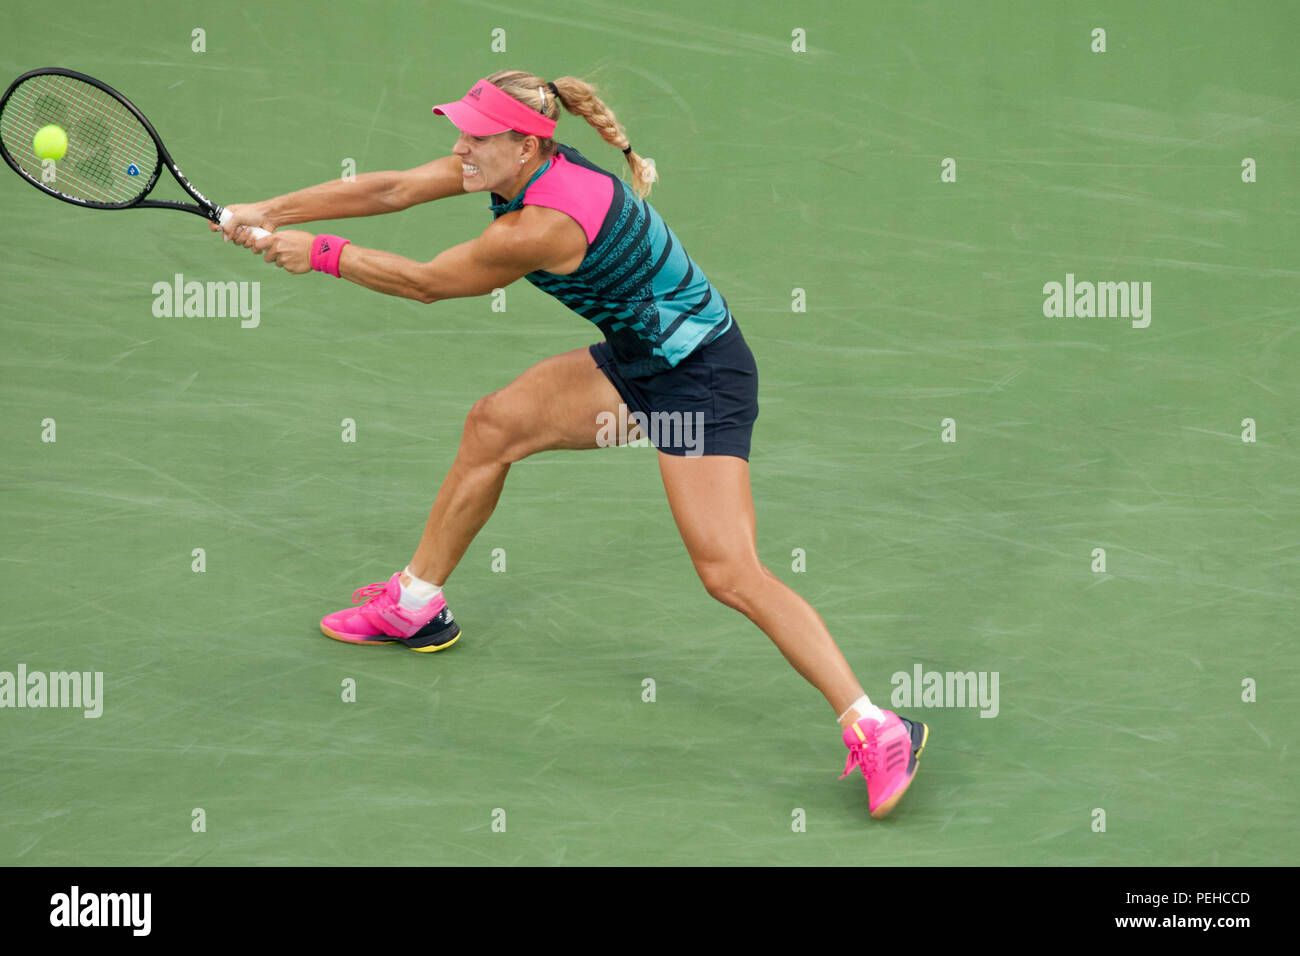 Cincinnati, OH, USA. 15th Aug, 2018. Western and Southern Open Tennis, Cincinnati, OH - Cincinnati, Ohio, USA. 15th Aug, 2018. Angelique Kerber in action against Anastasia Pavlyuchenkova in the Western and Southern Tennis tournament held in Cincinnati. - Photo by Wally Nell/ZUMA Press Credit: Wally Nell/ZUMA Wire/Alamy Live News Stock Photo